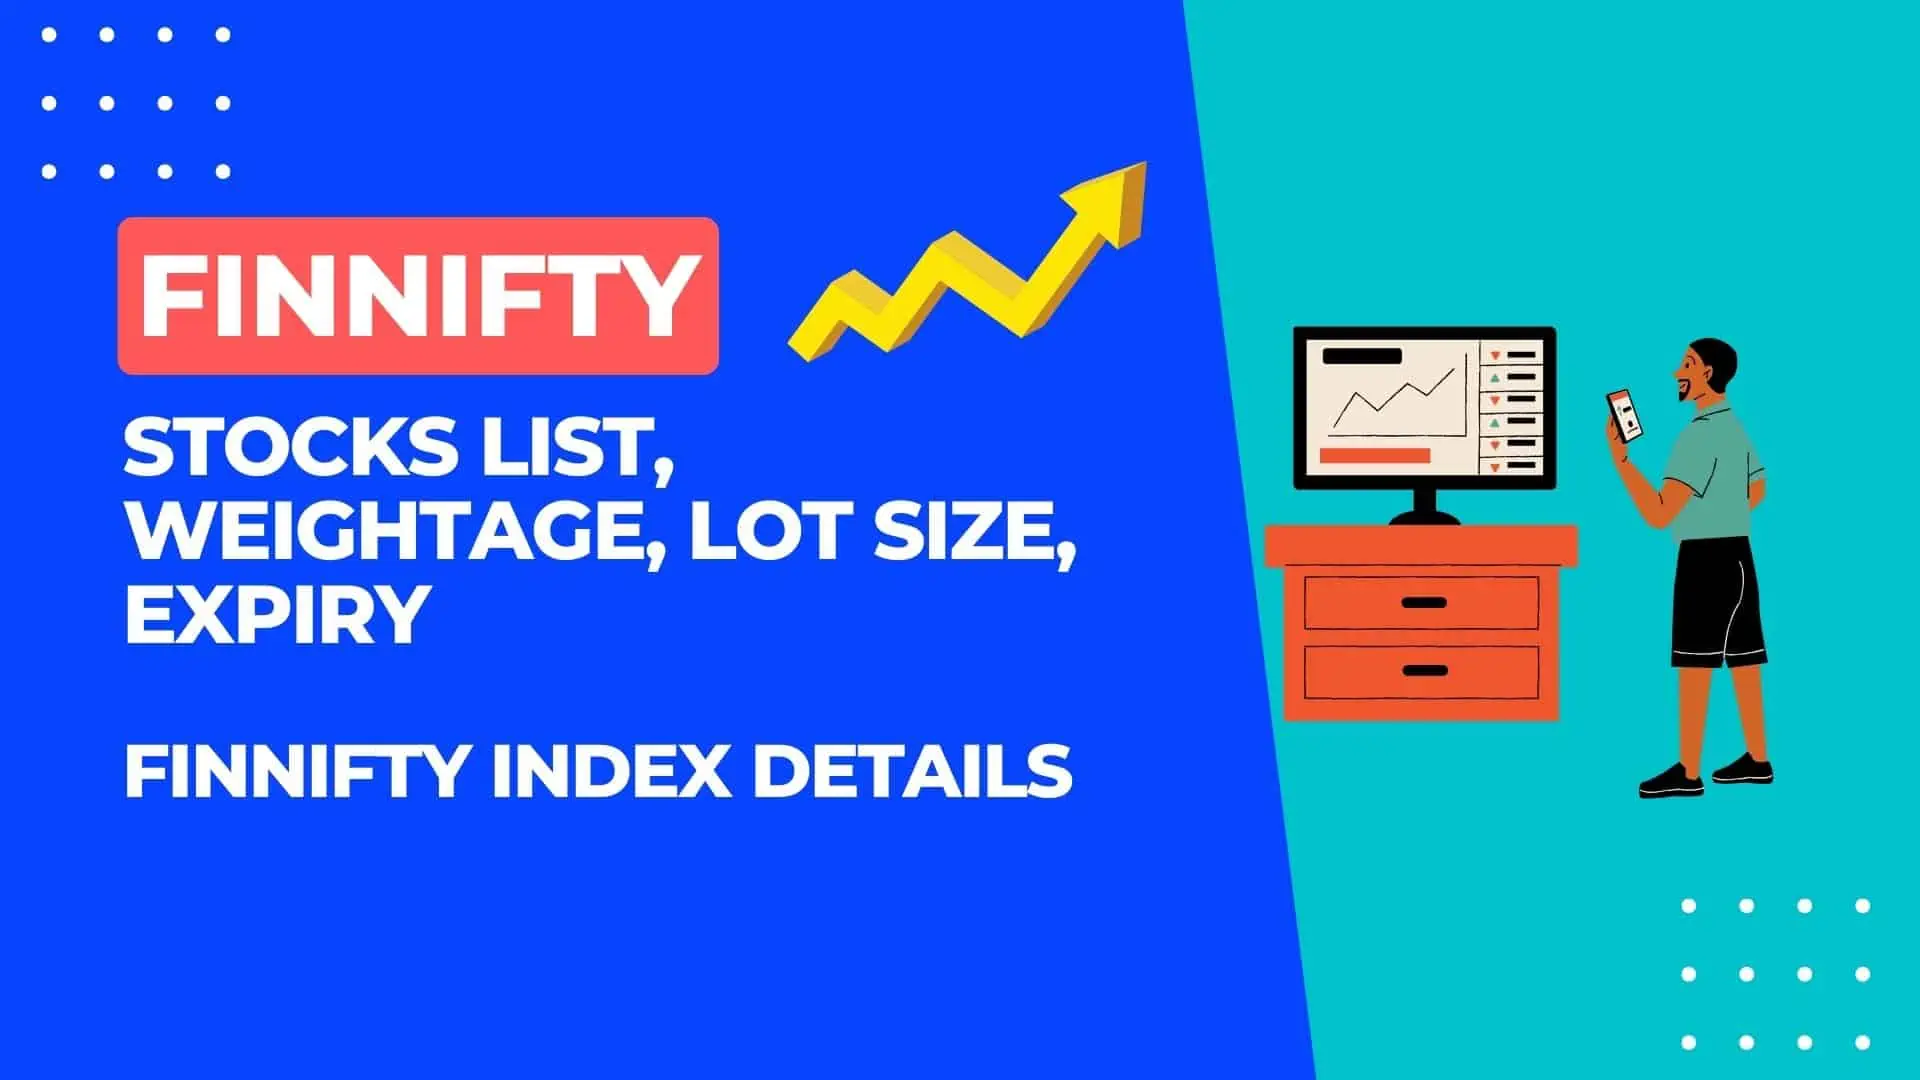 FINNIFTY Stocks List, Weightage, Lot Size, Expiry, and FINNIFTY Index Details